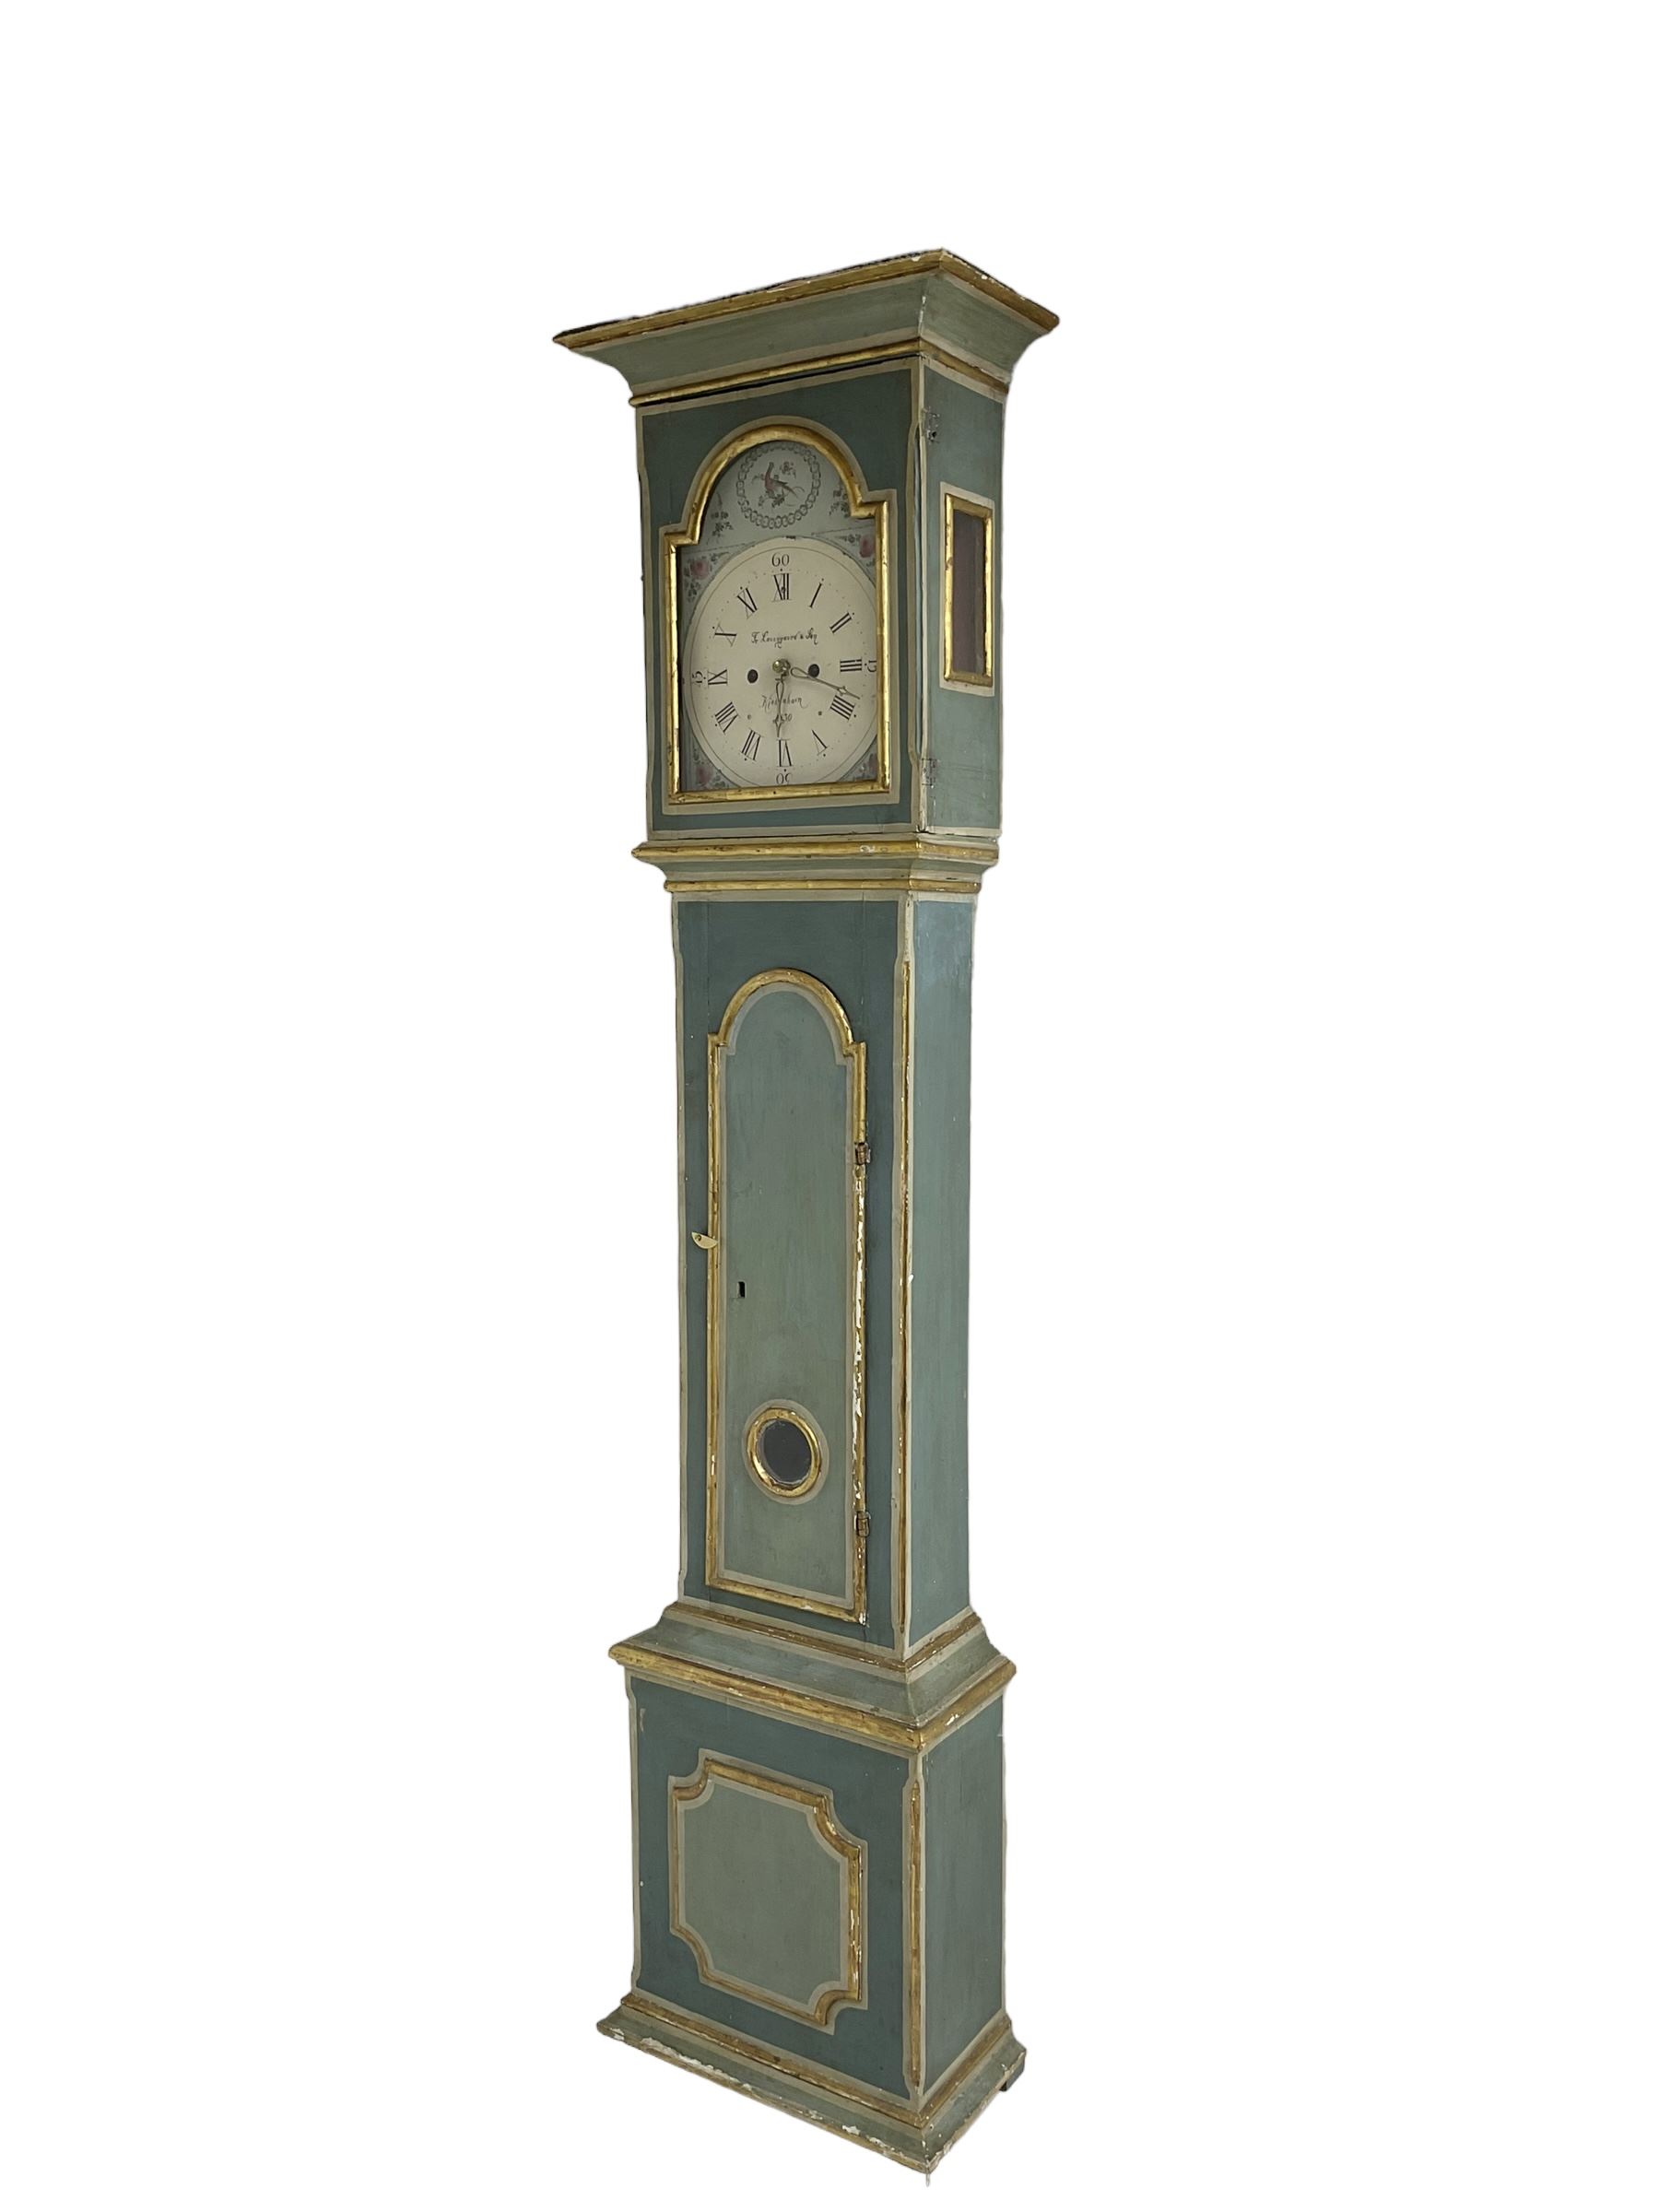 Painted longcase clock - with a flat topped pediment and break arch hood door - Image 2 of 5